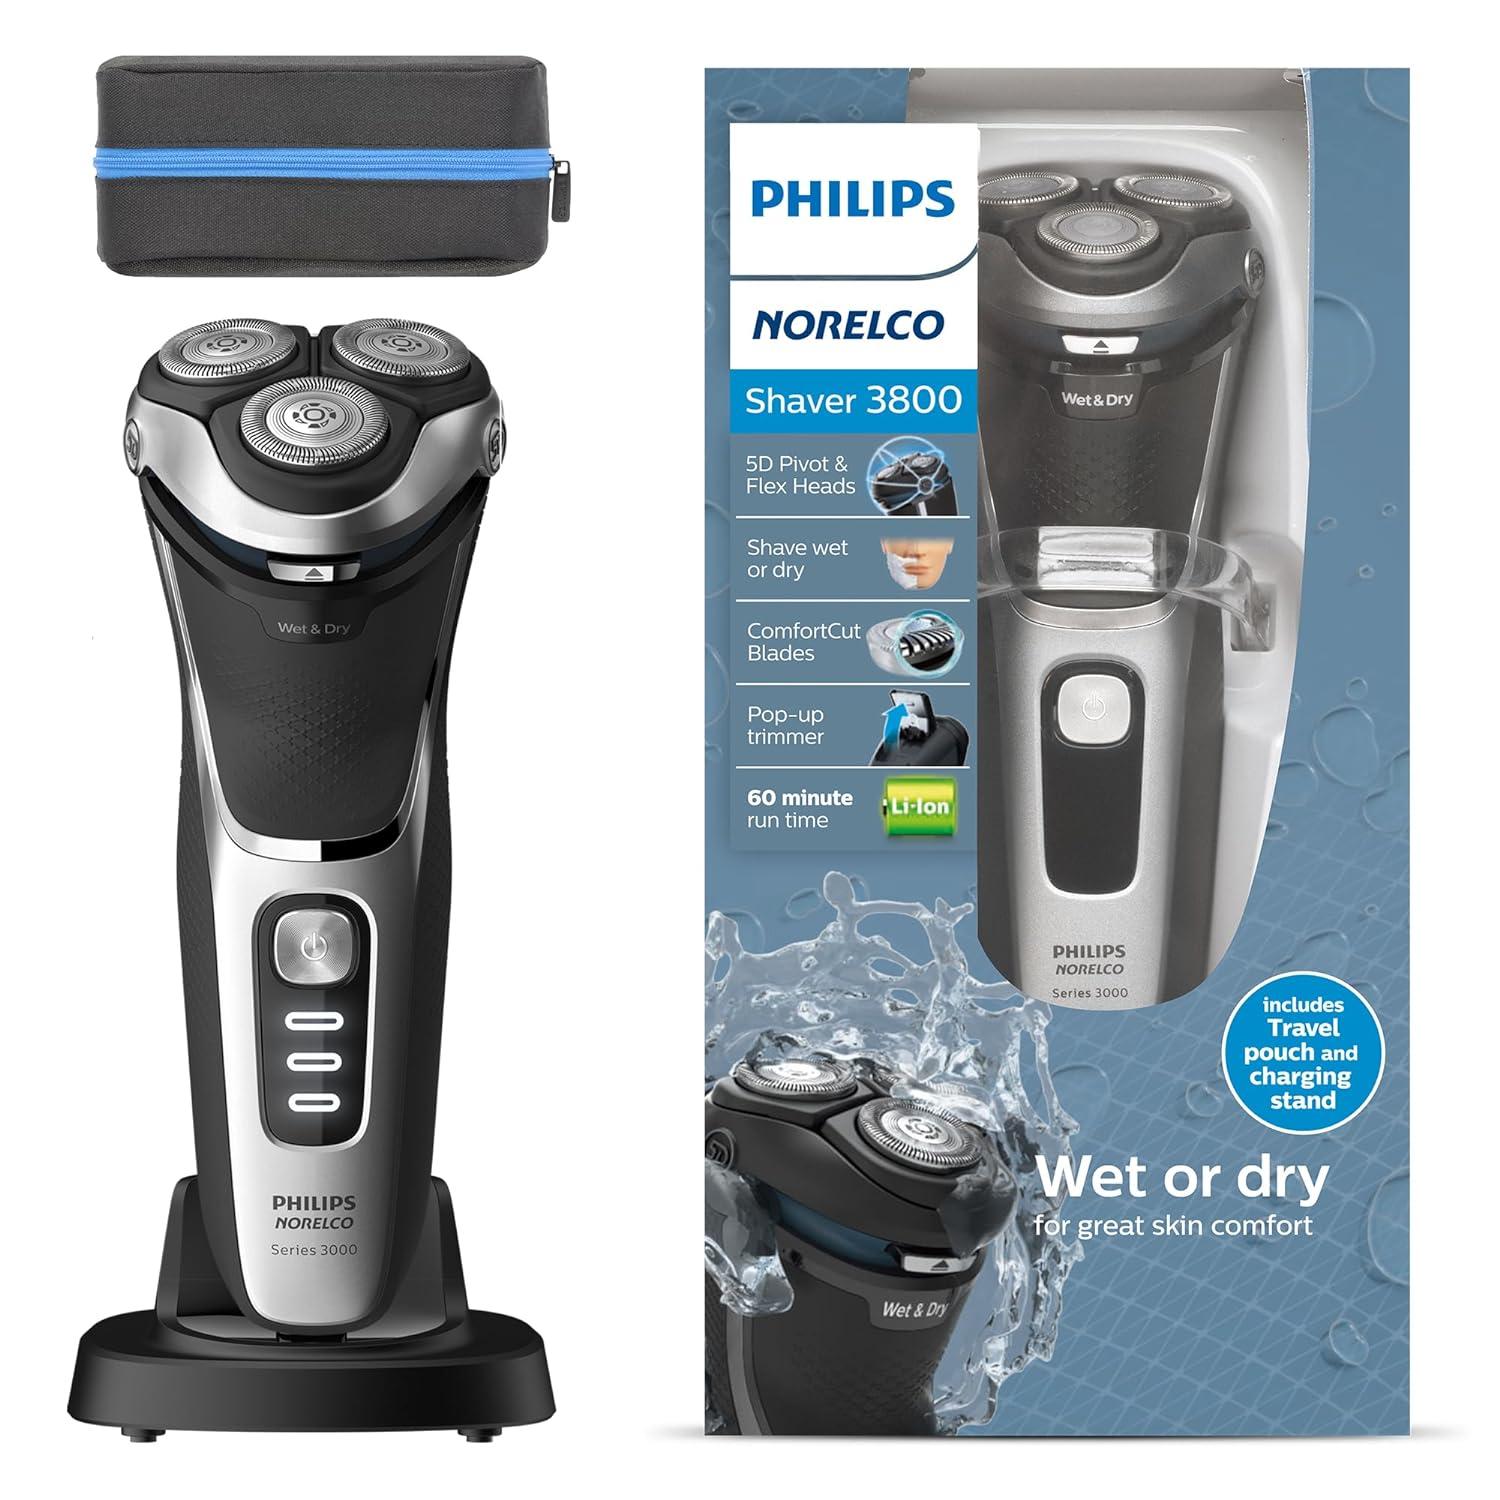 Philips Norelco Shaver 3800 Rechargeable Wet and Dry Shaver for $55.76 Shipped